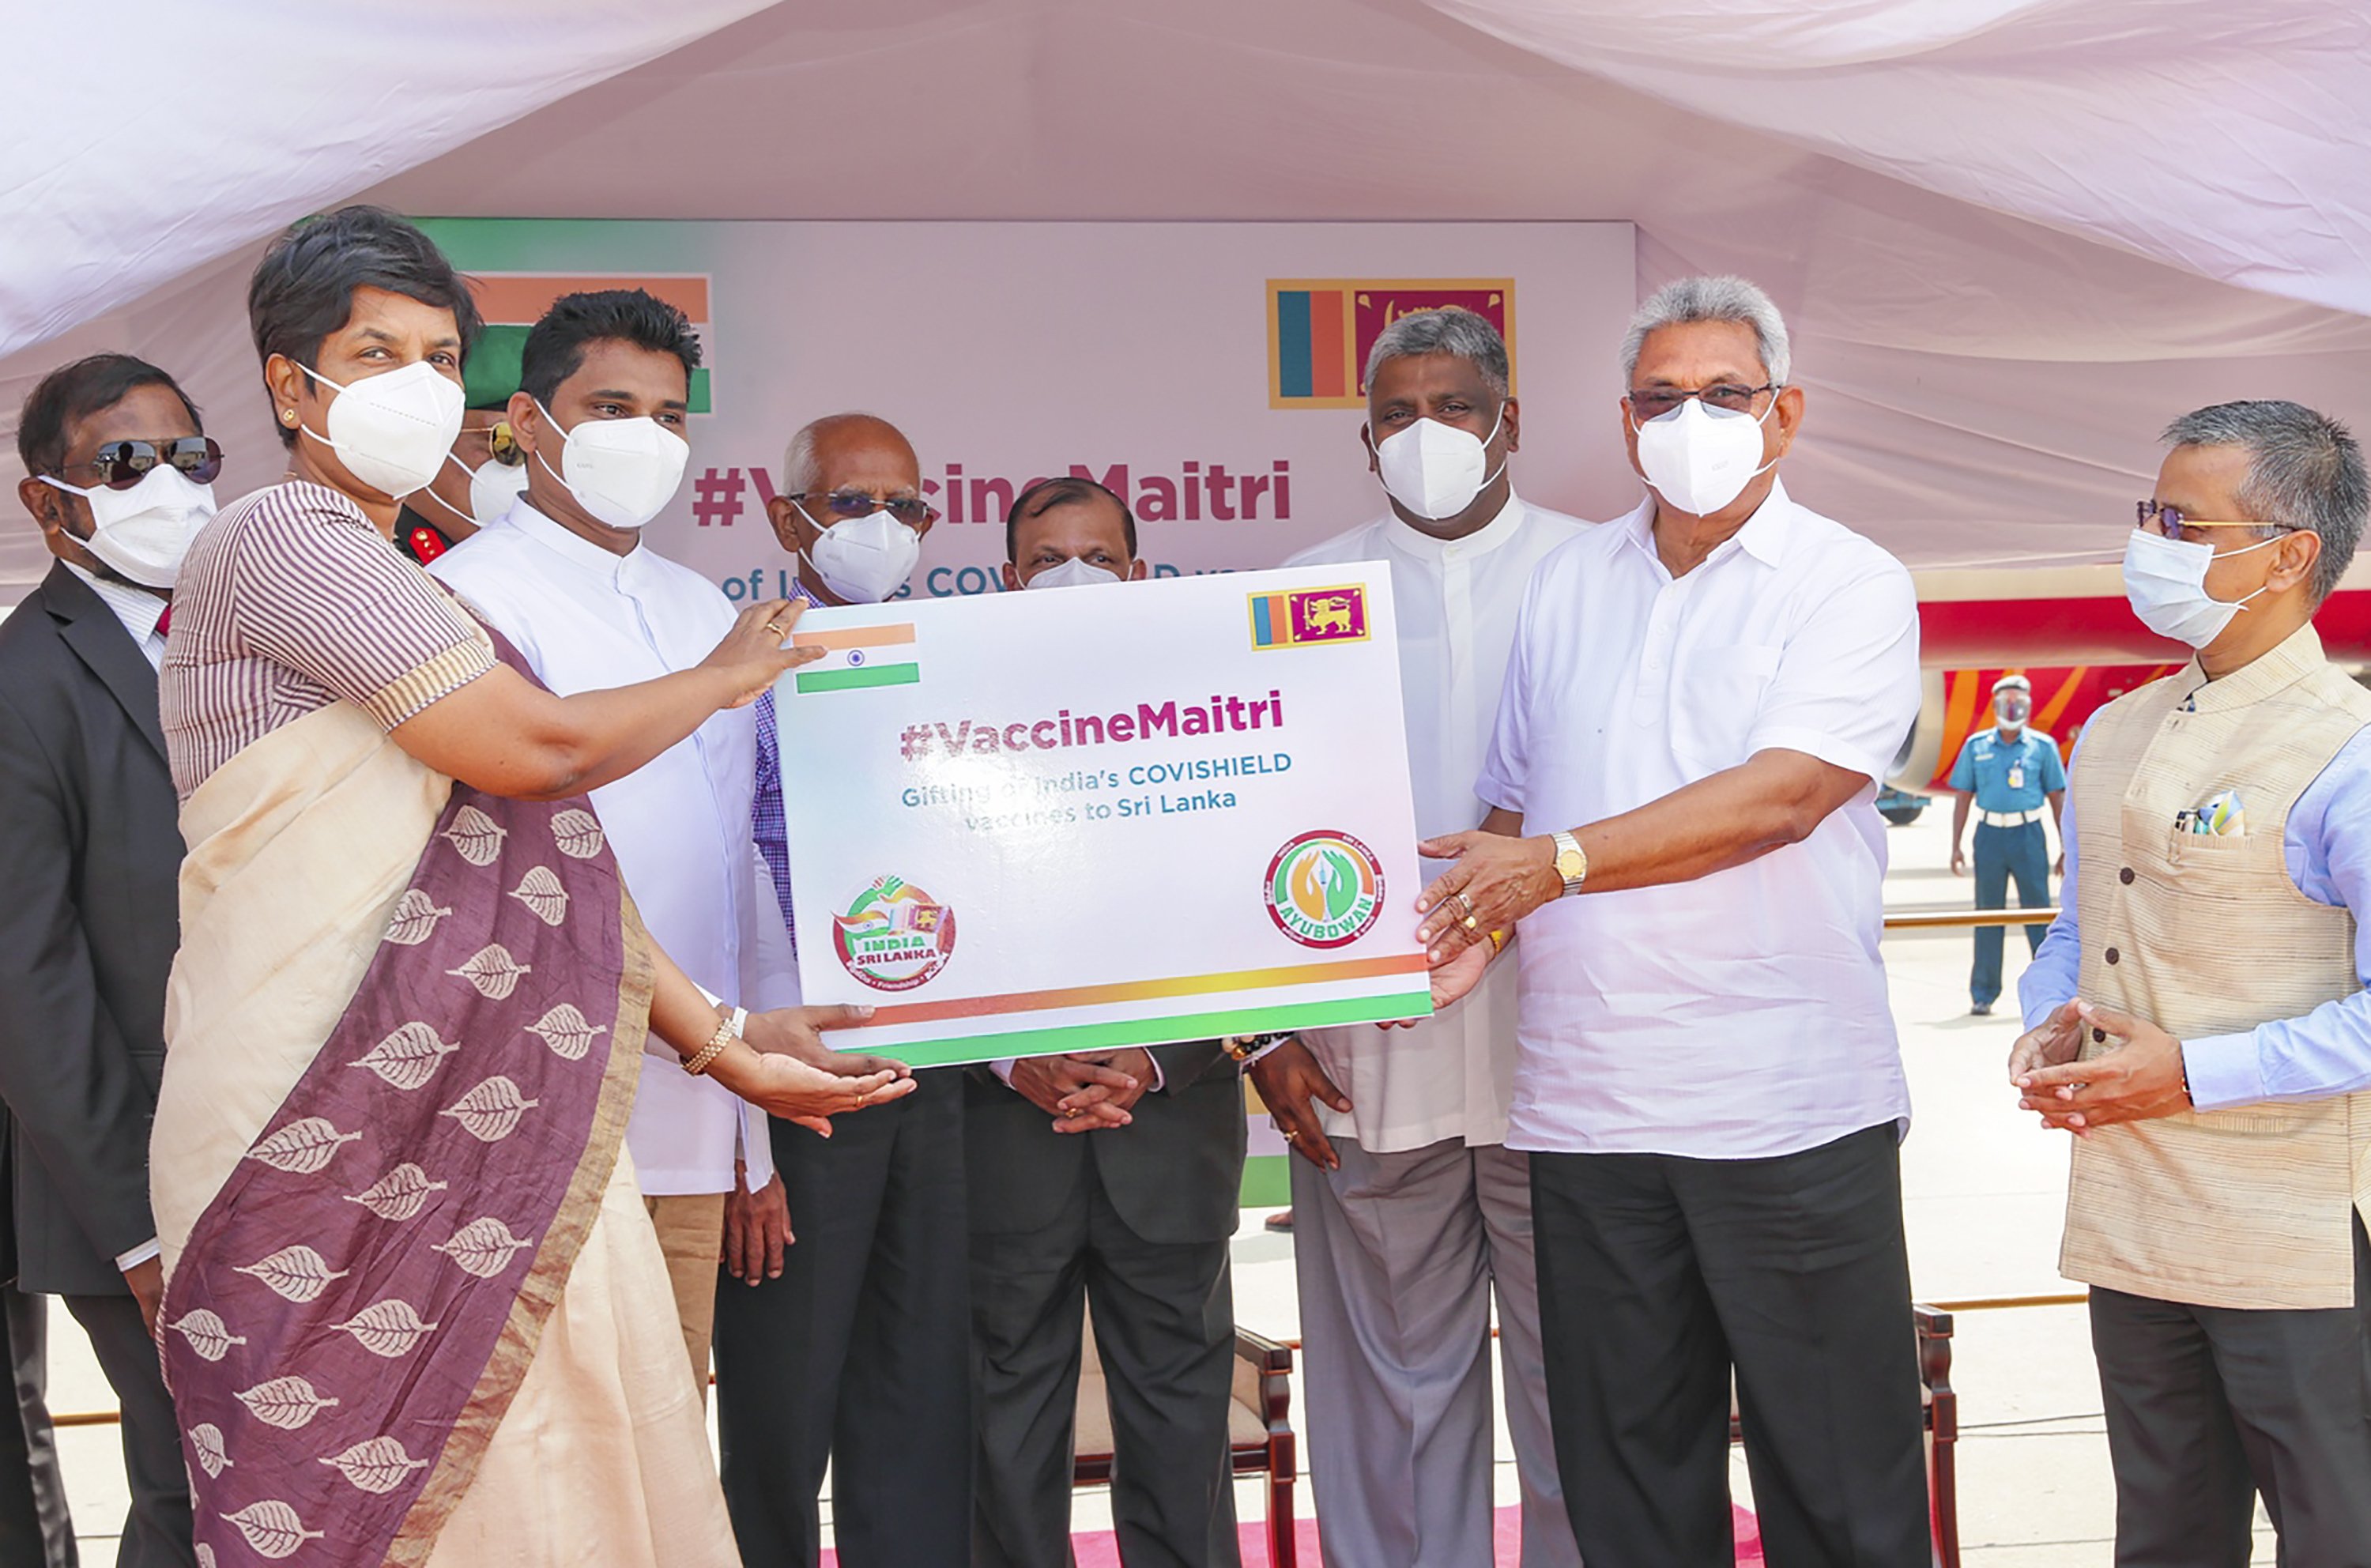 India is donating the first 500,000 doses of vaccine to Sri Lanka